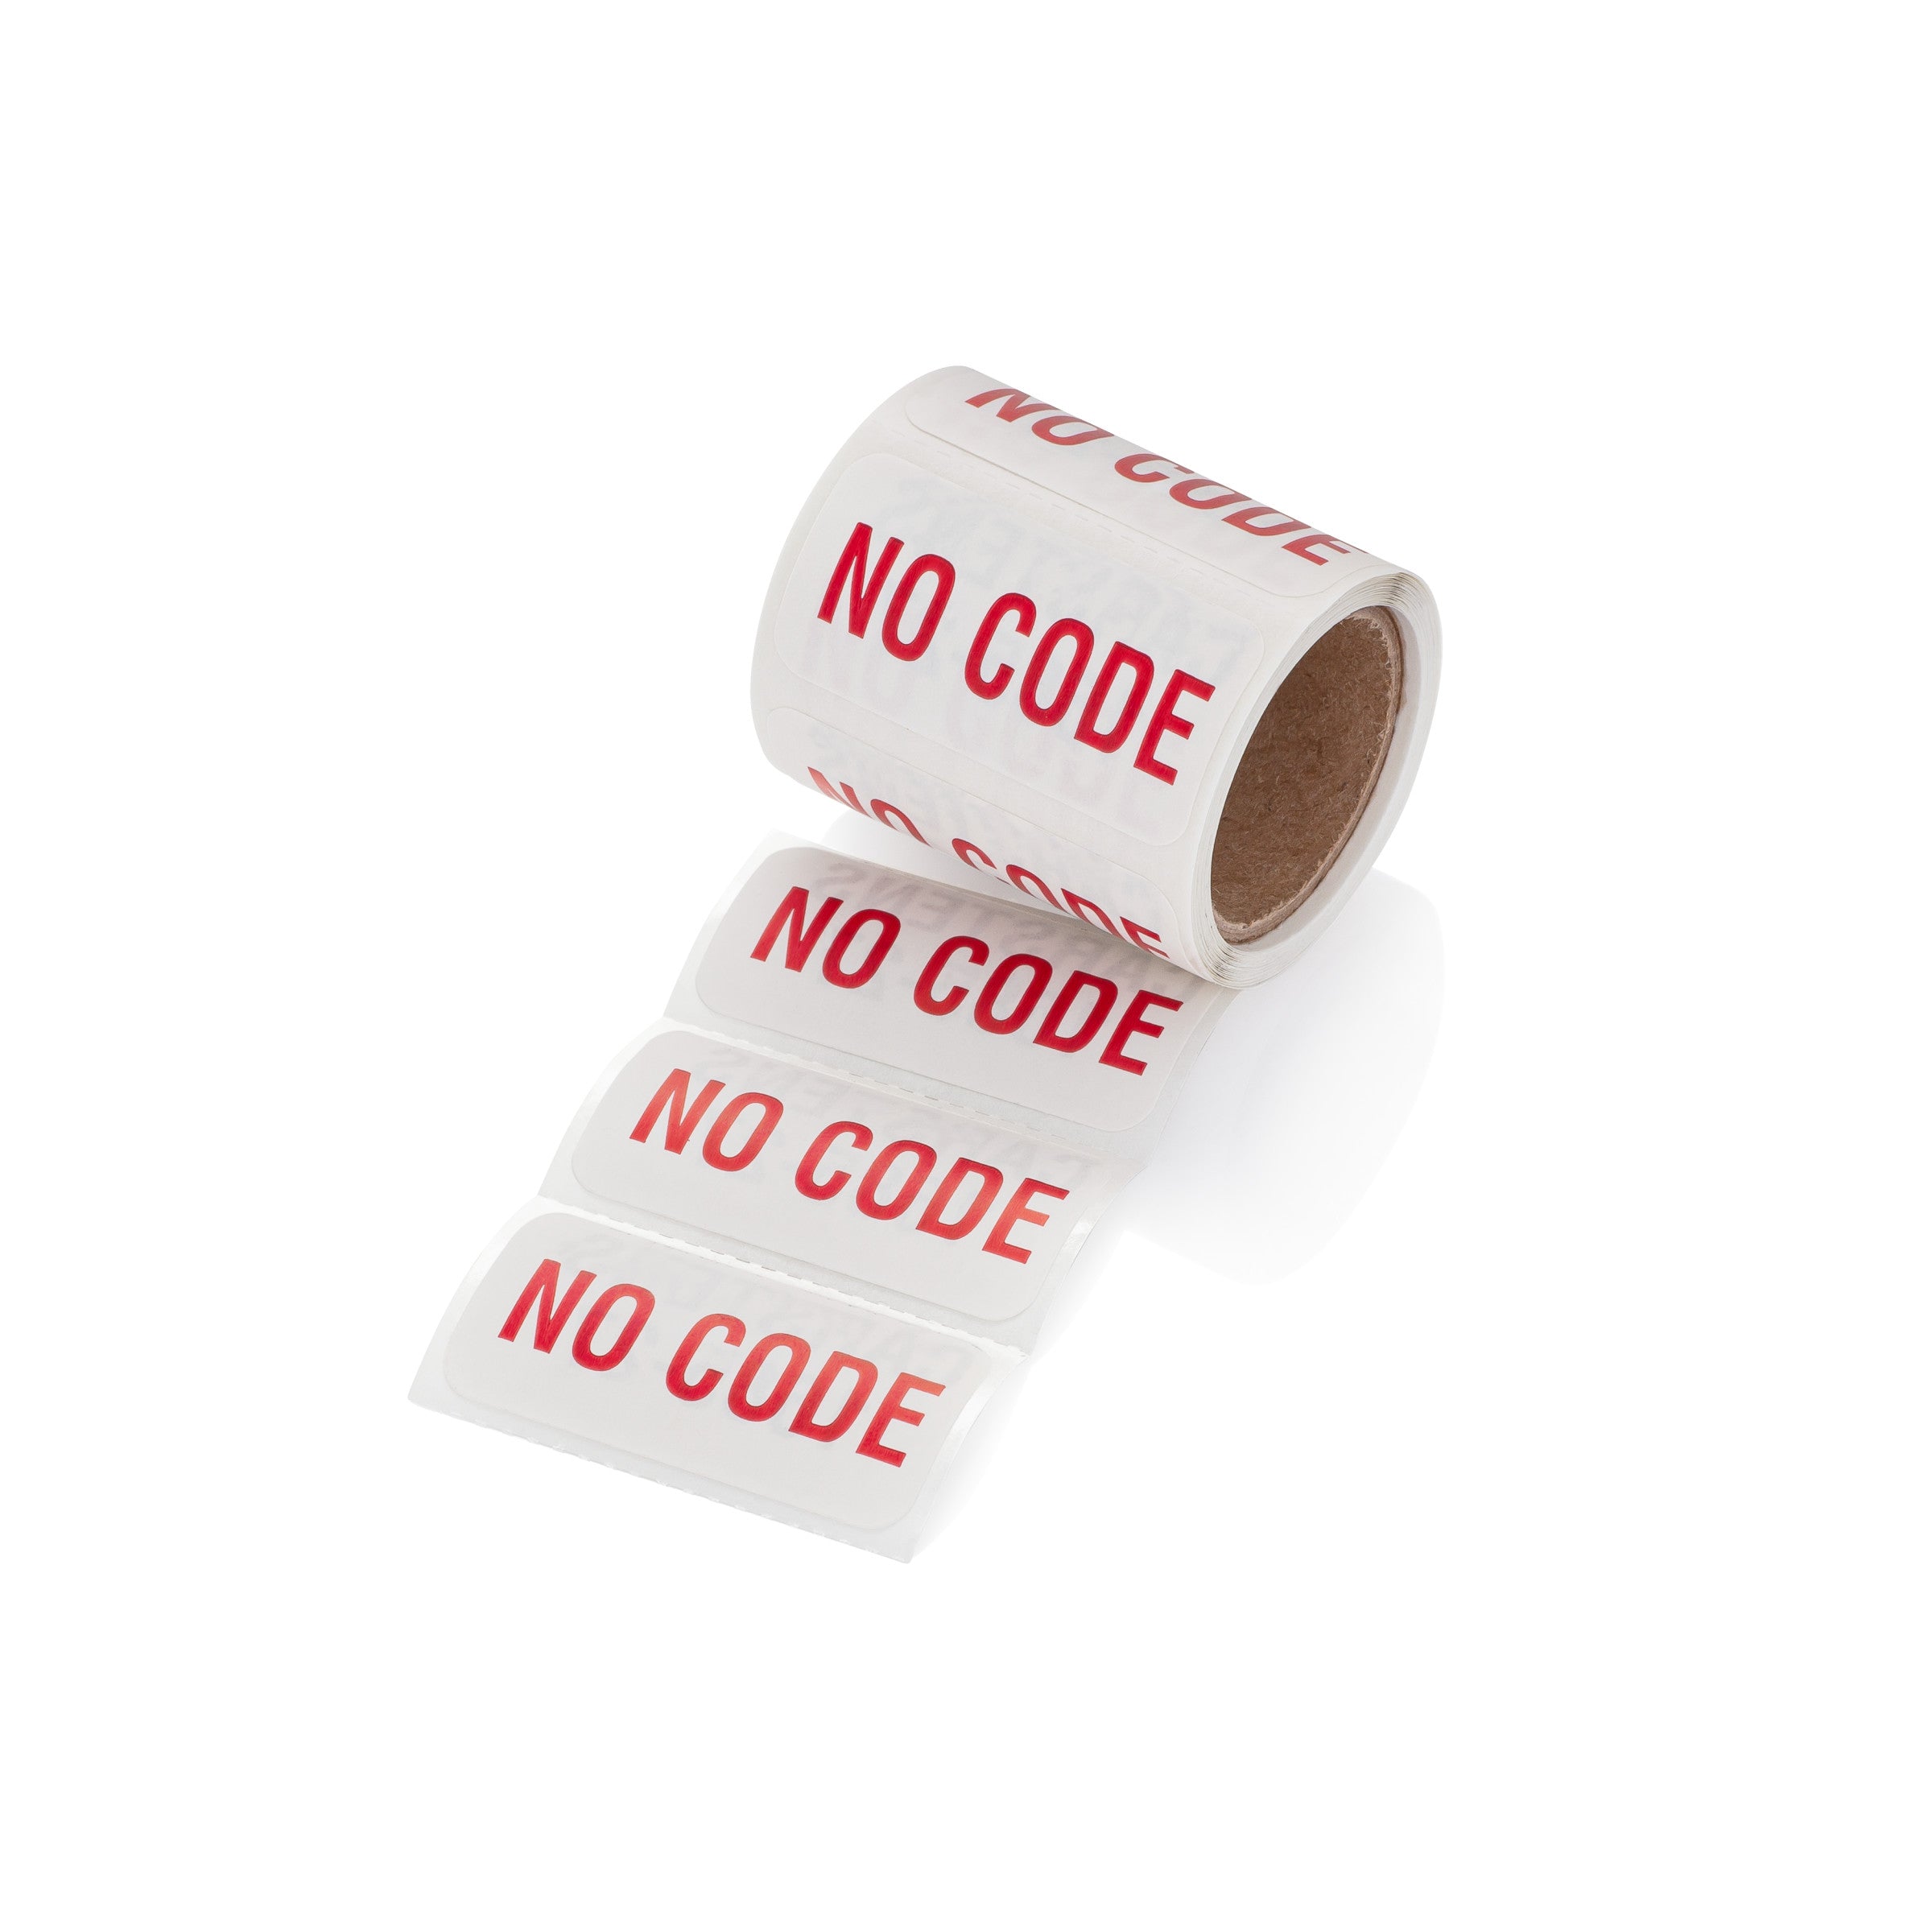 No Code Alert and Instruction Labels, White, W1.5" x H.75" (Roll of 100)